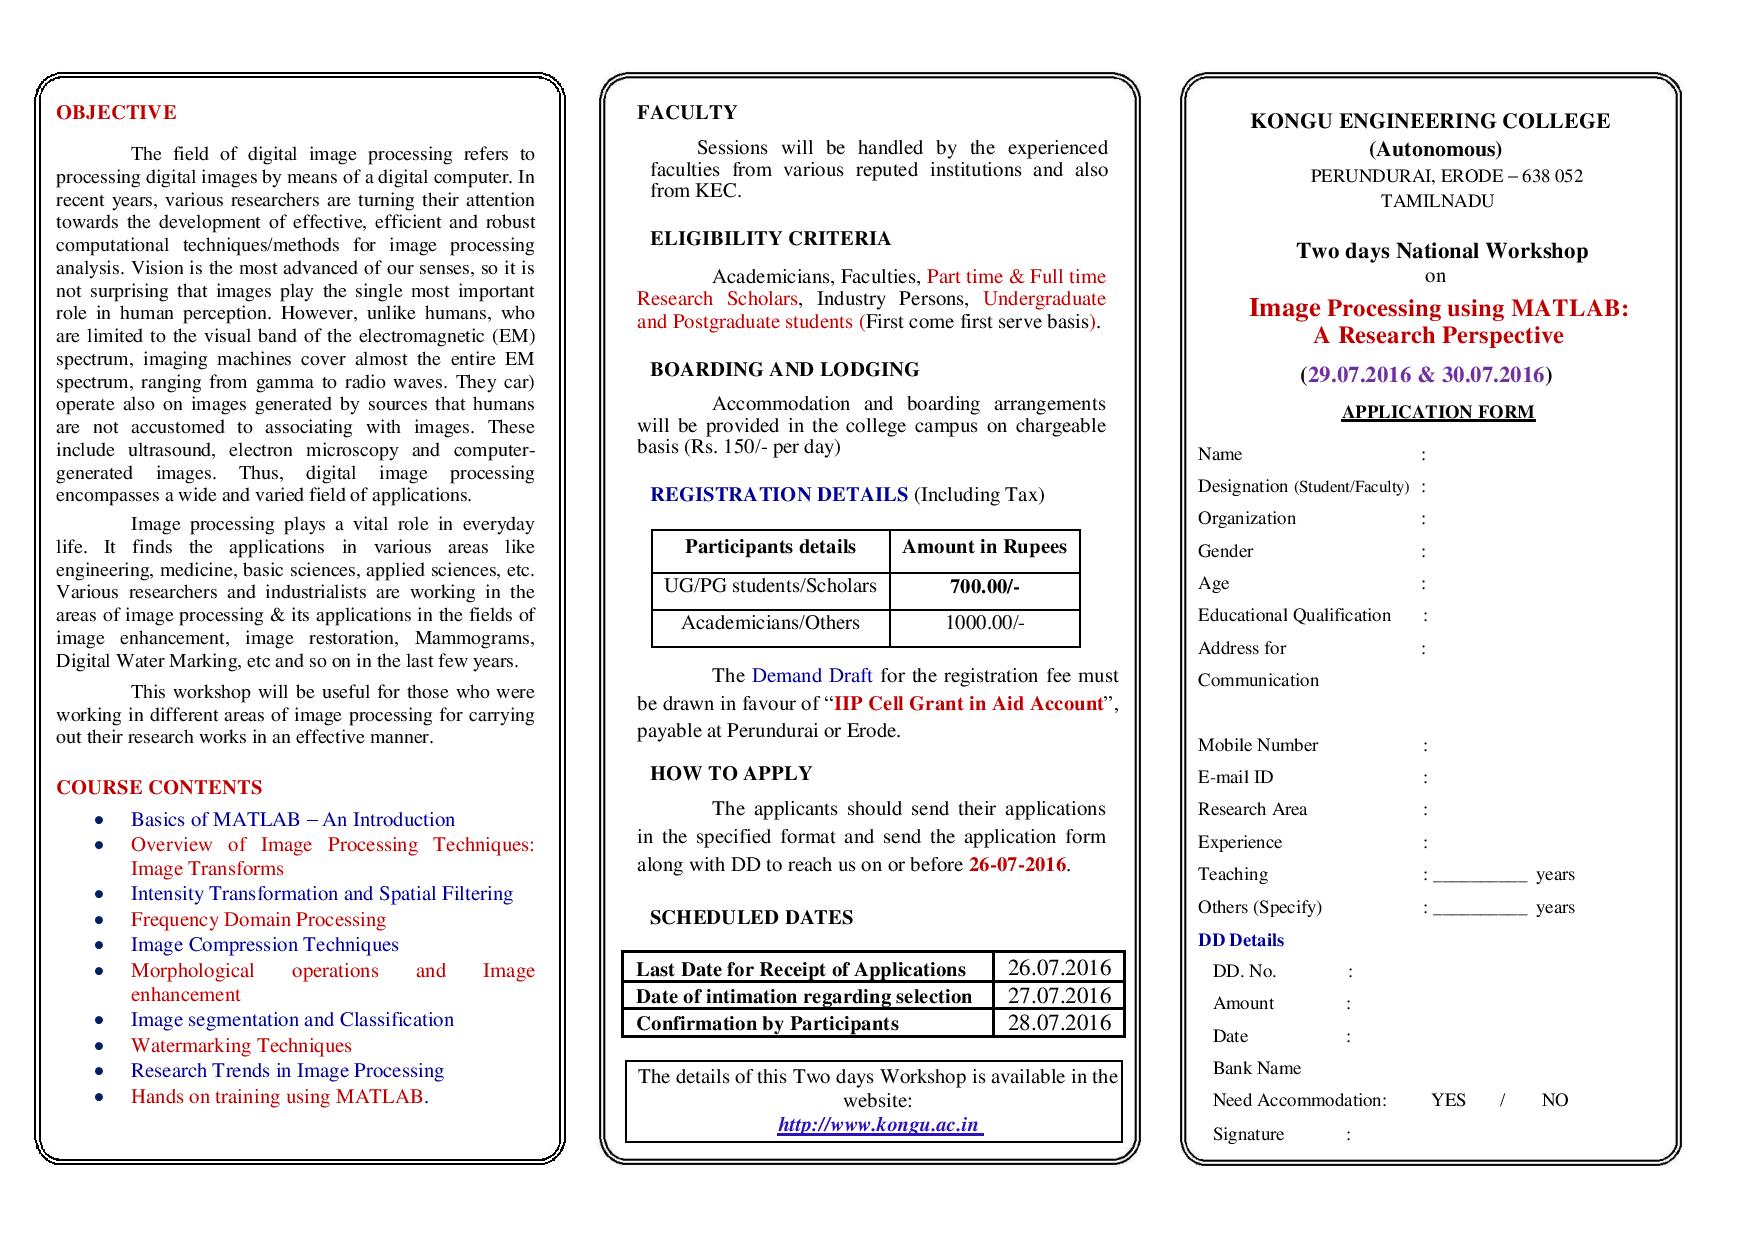 Two days National Workshop on  Image Processing using MATLAB:  A Research Perspective, Erode, Tamil Nadu, India